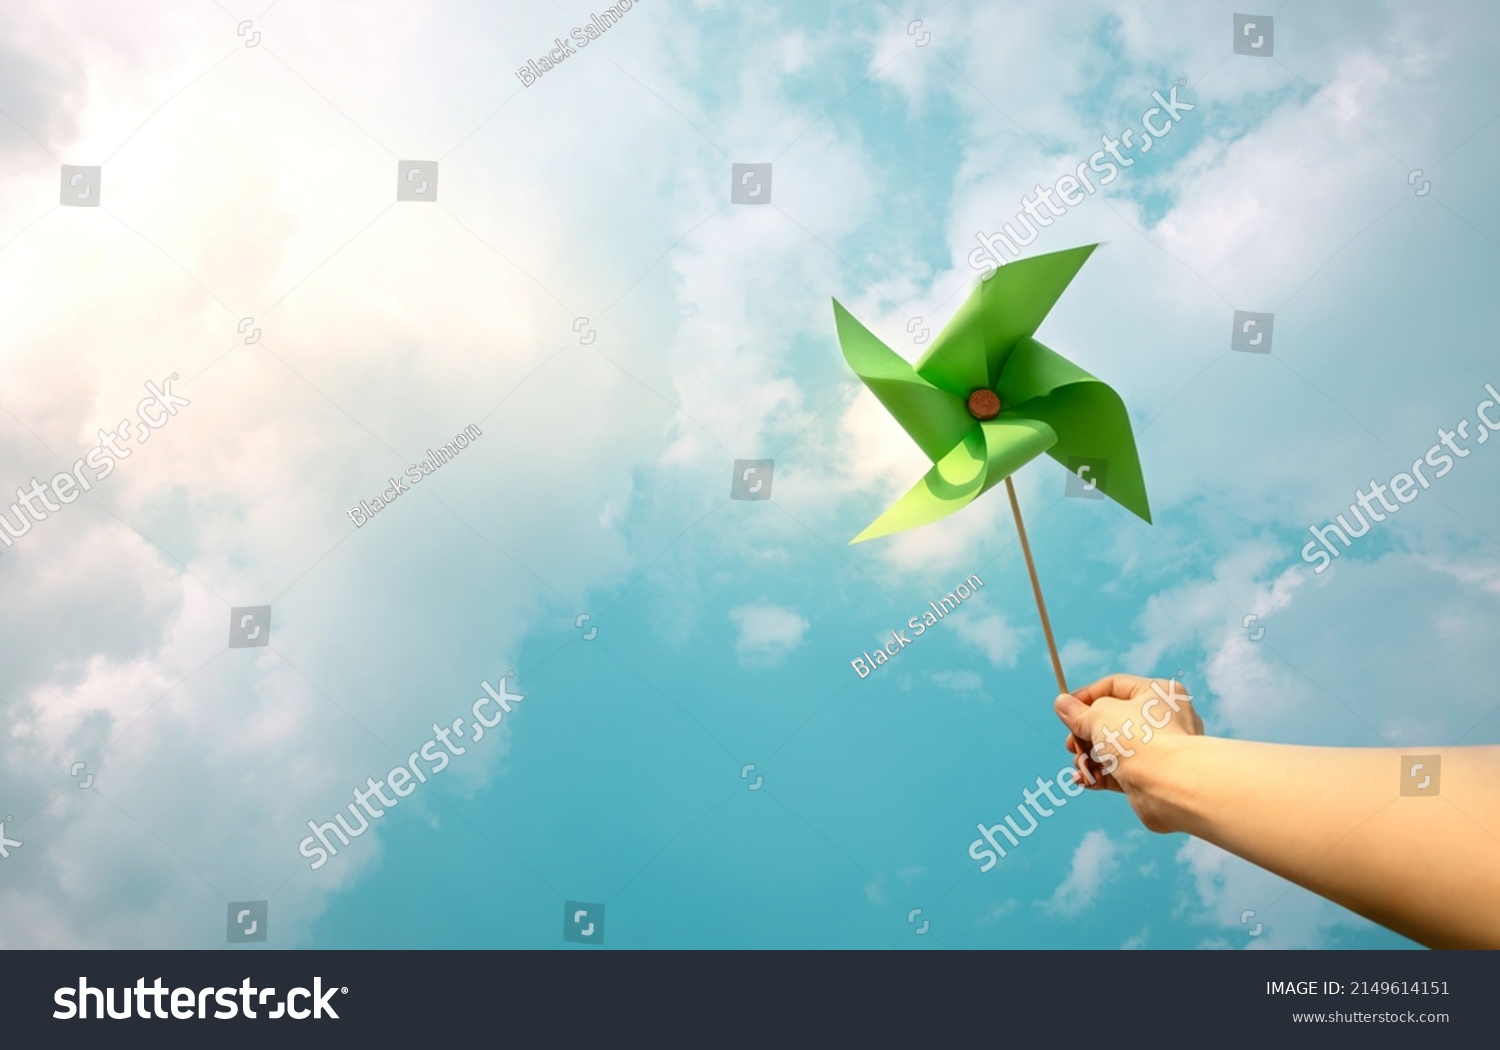 ESG and Clean Energy Concept. Hand Raise up a Wind Turbine Paper into the Sky. Decrease Carbon and Produce a Green Power. World Earth Day, Sustainable Resources, Environmental Care #2149614151